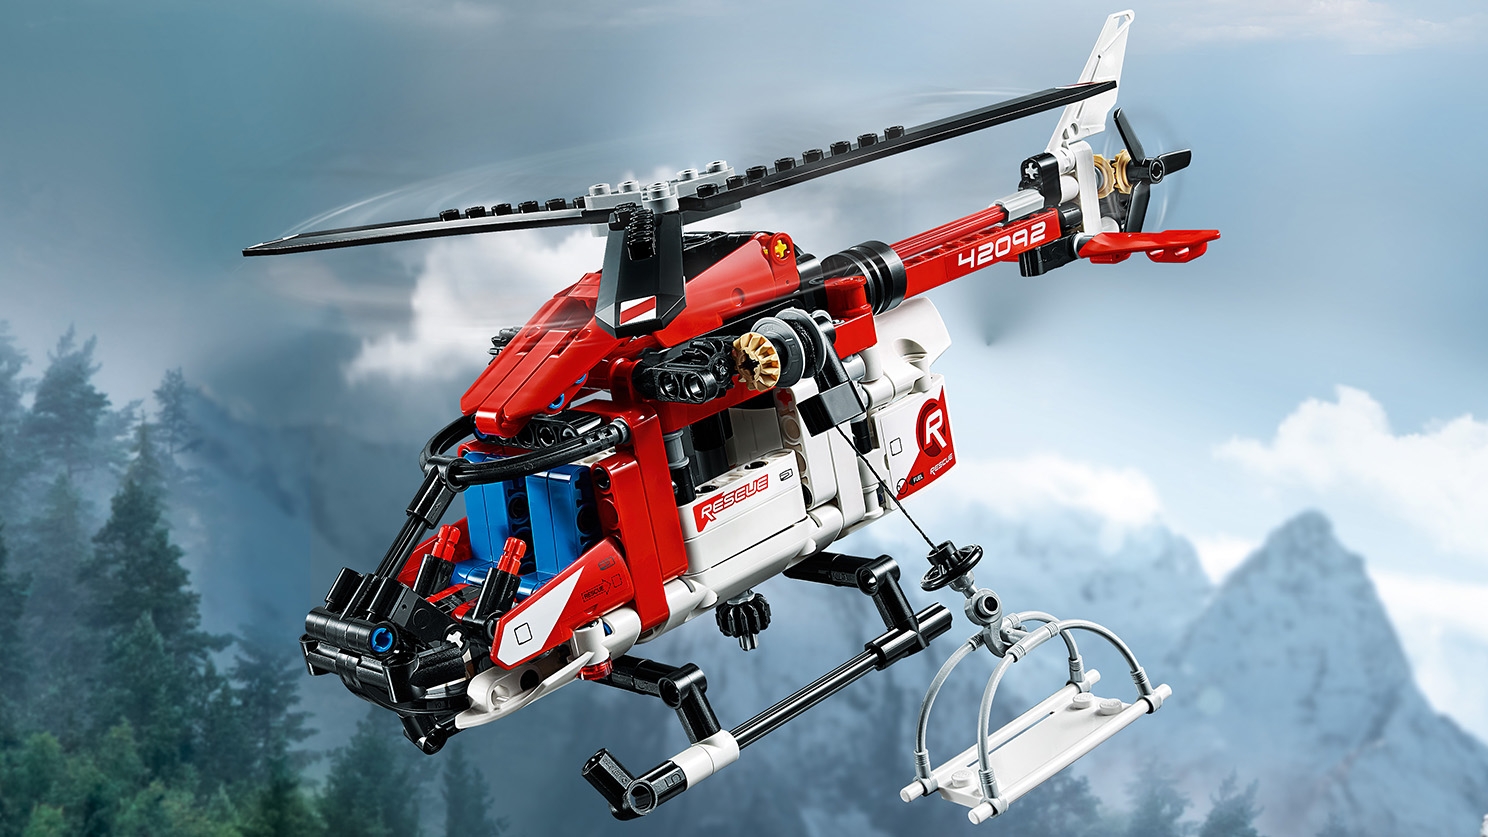 Rescue Helicopter 42092 - LEGO® Technic Sets LEGO.com for kids